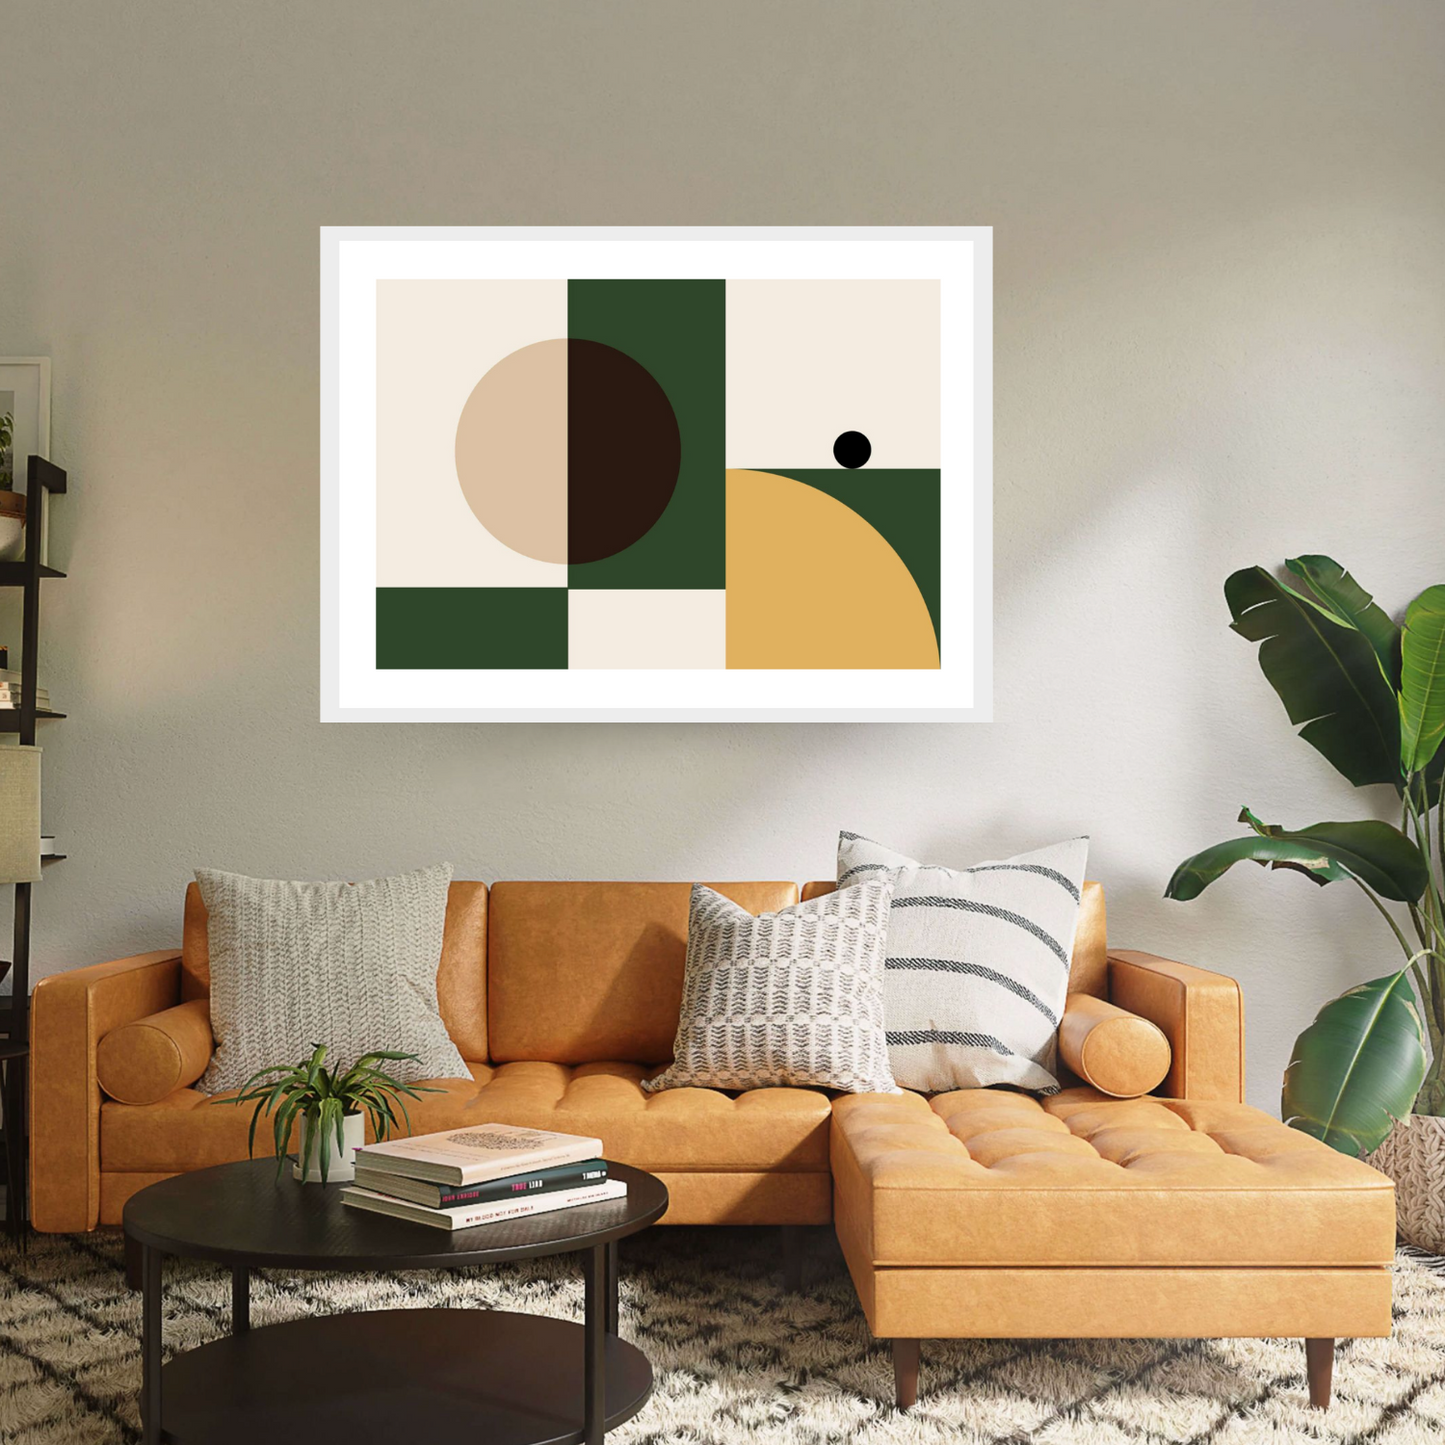  "Botanist Puzzle" by George Rosaly. A stunning white framed archival digital print that blends abstraction and street art, this contemporary piece features vibrant green, black, and yellow shapes against a cream backdrop, embodying the essence of the Pop Art movement. 